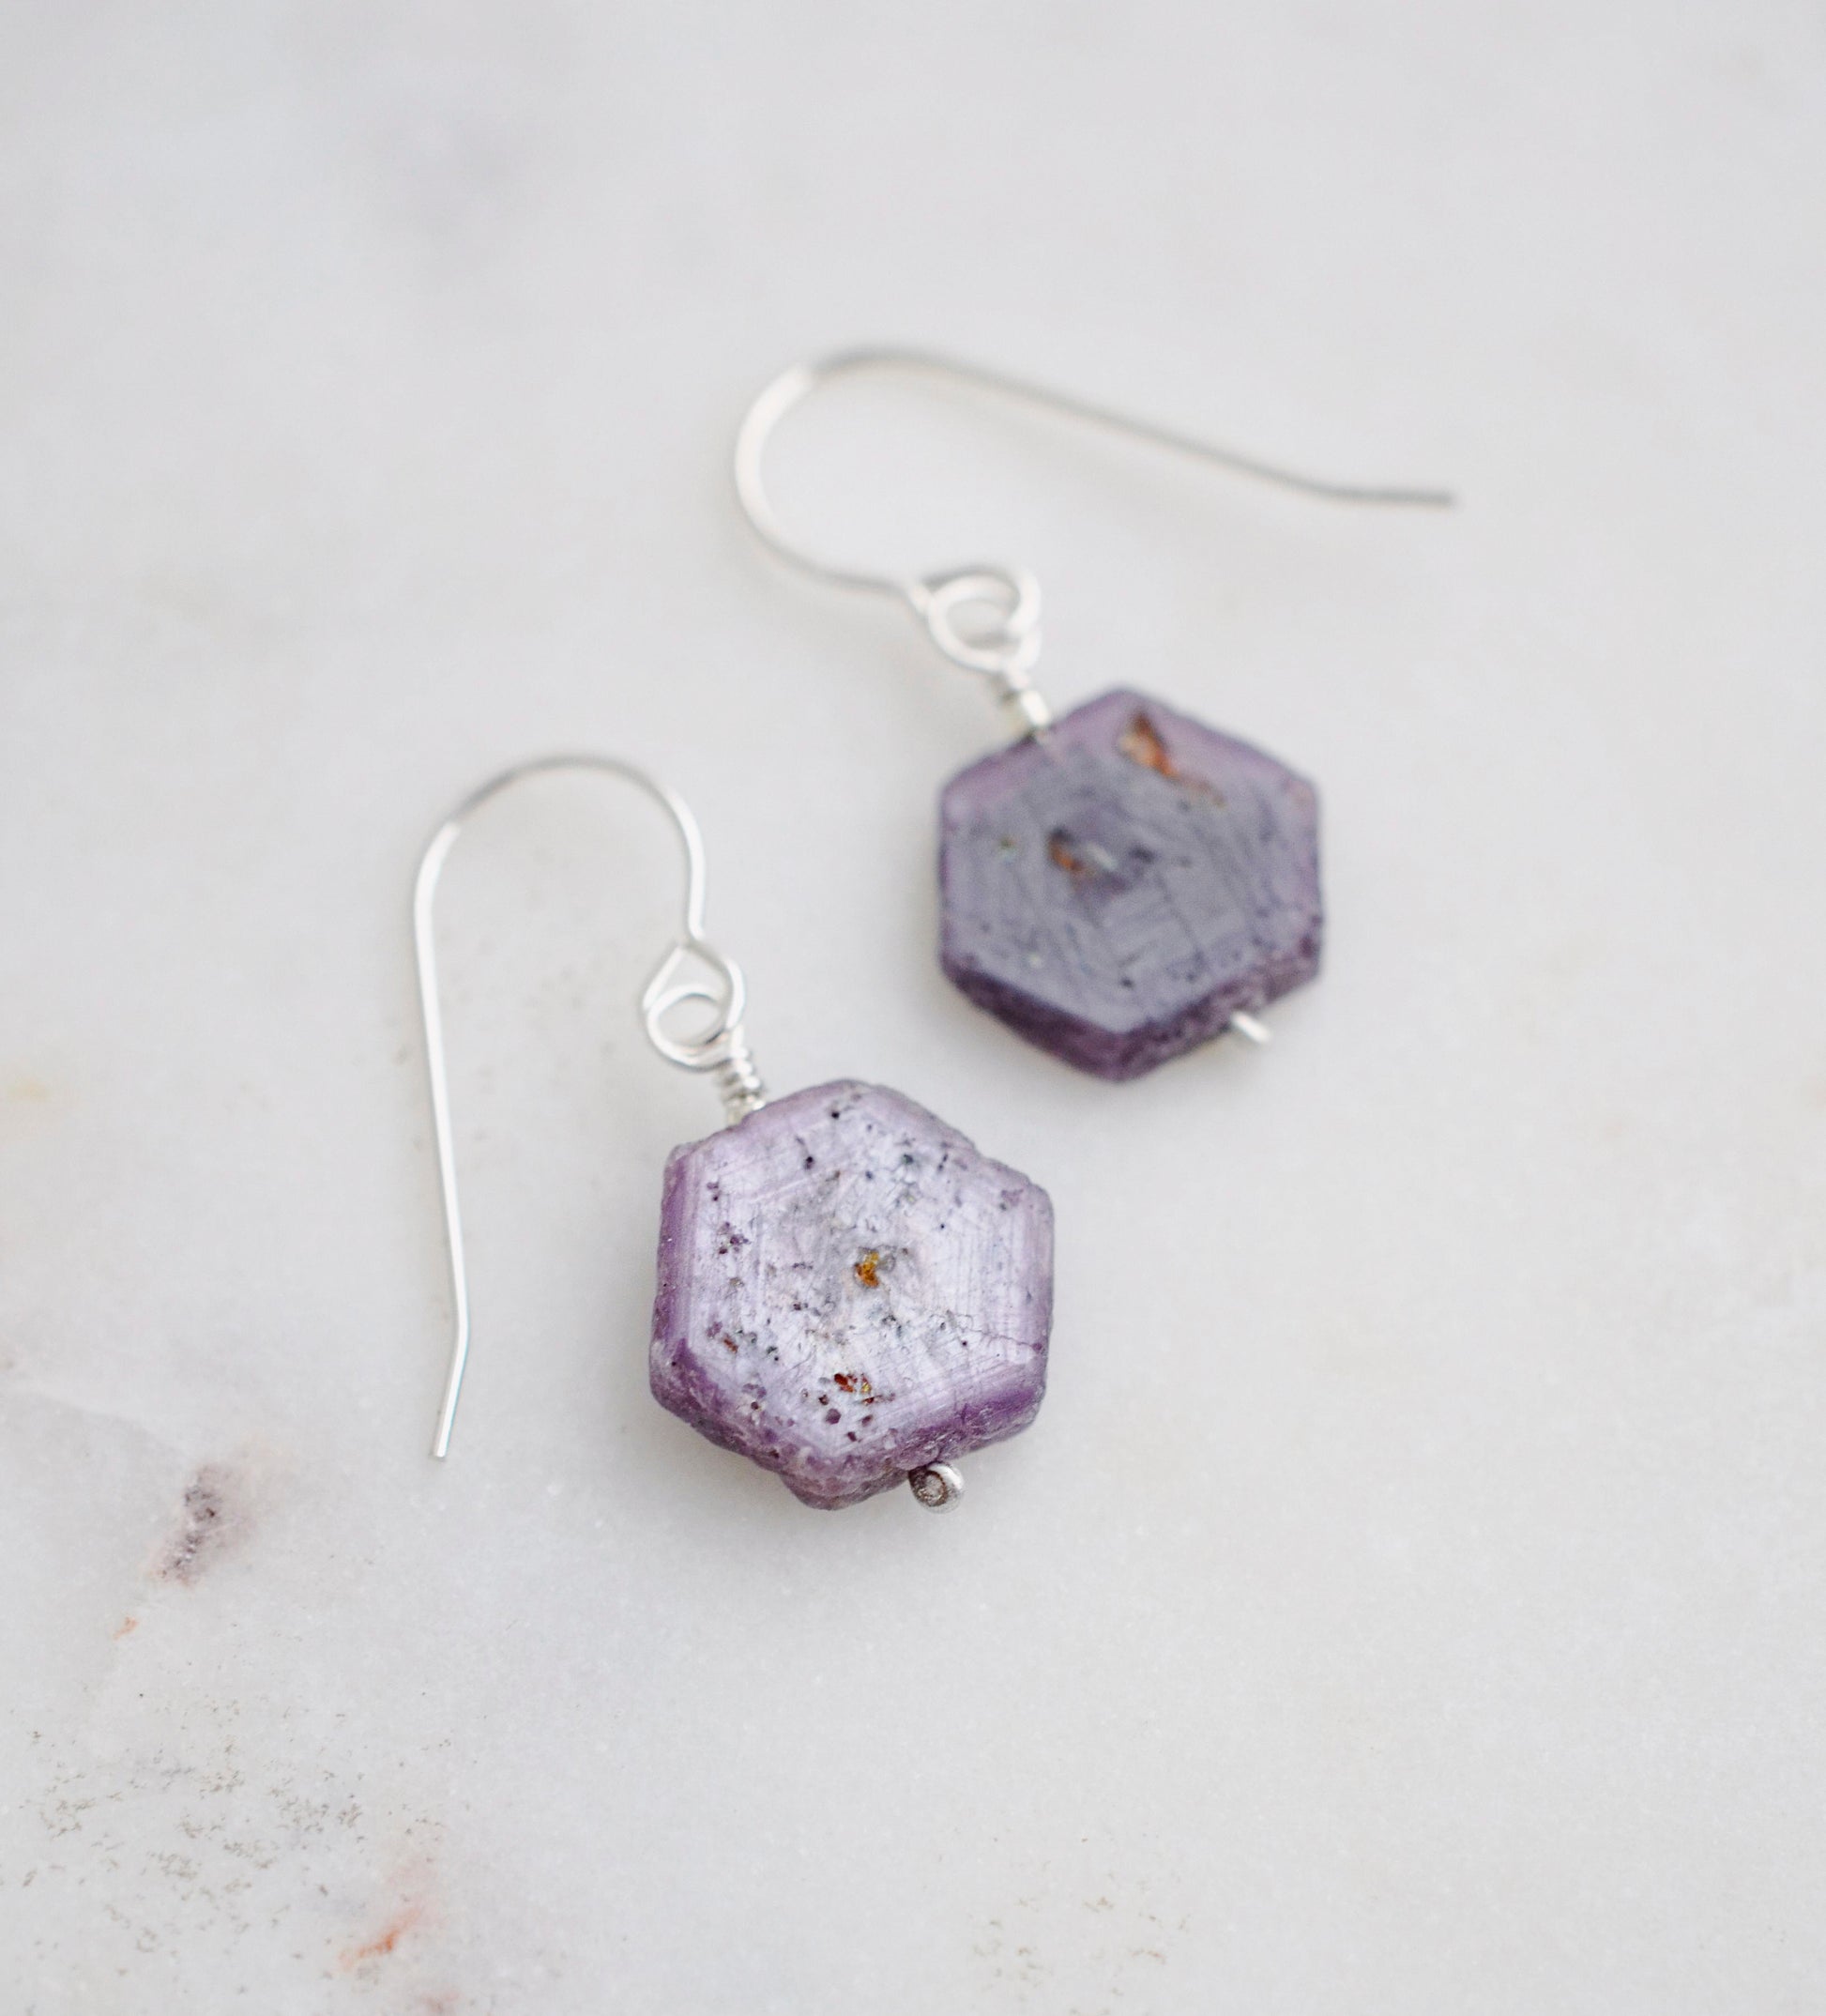 Purple-pink raw ruby stones suspended from sterling silver earwires. The stones are rough and in their natural hexagonal shape. 